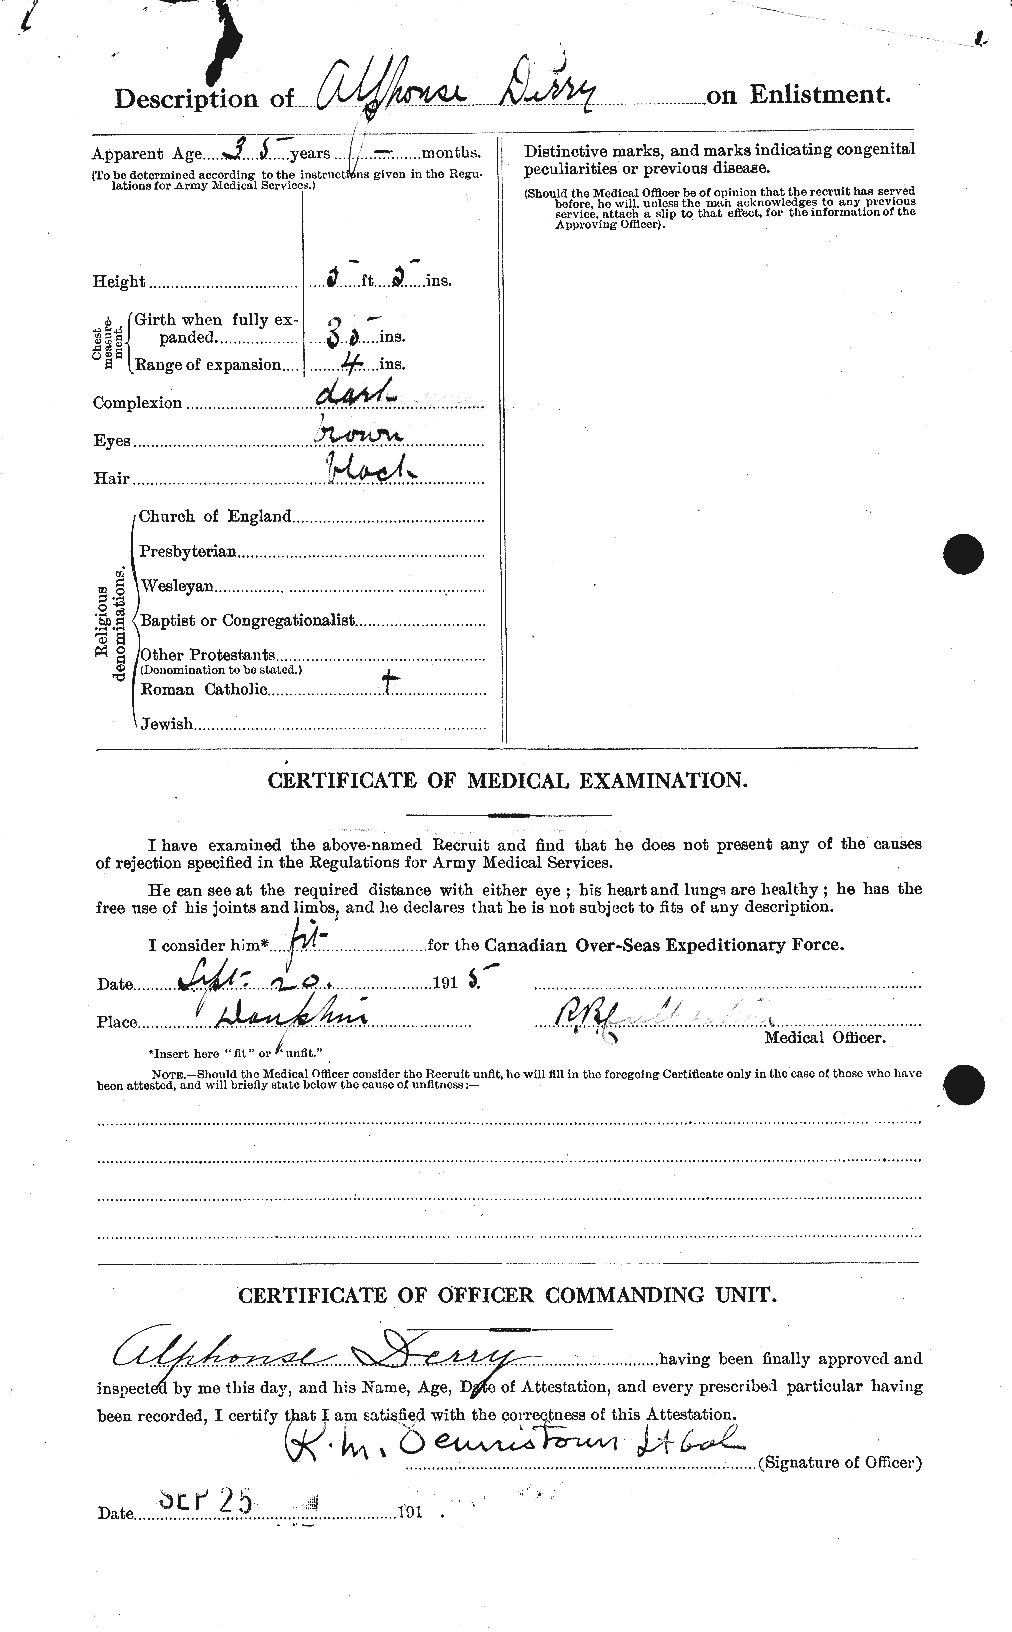 Personnel Records of the First World War - CEF 290359b